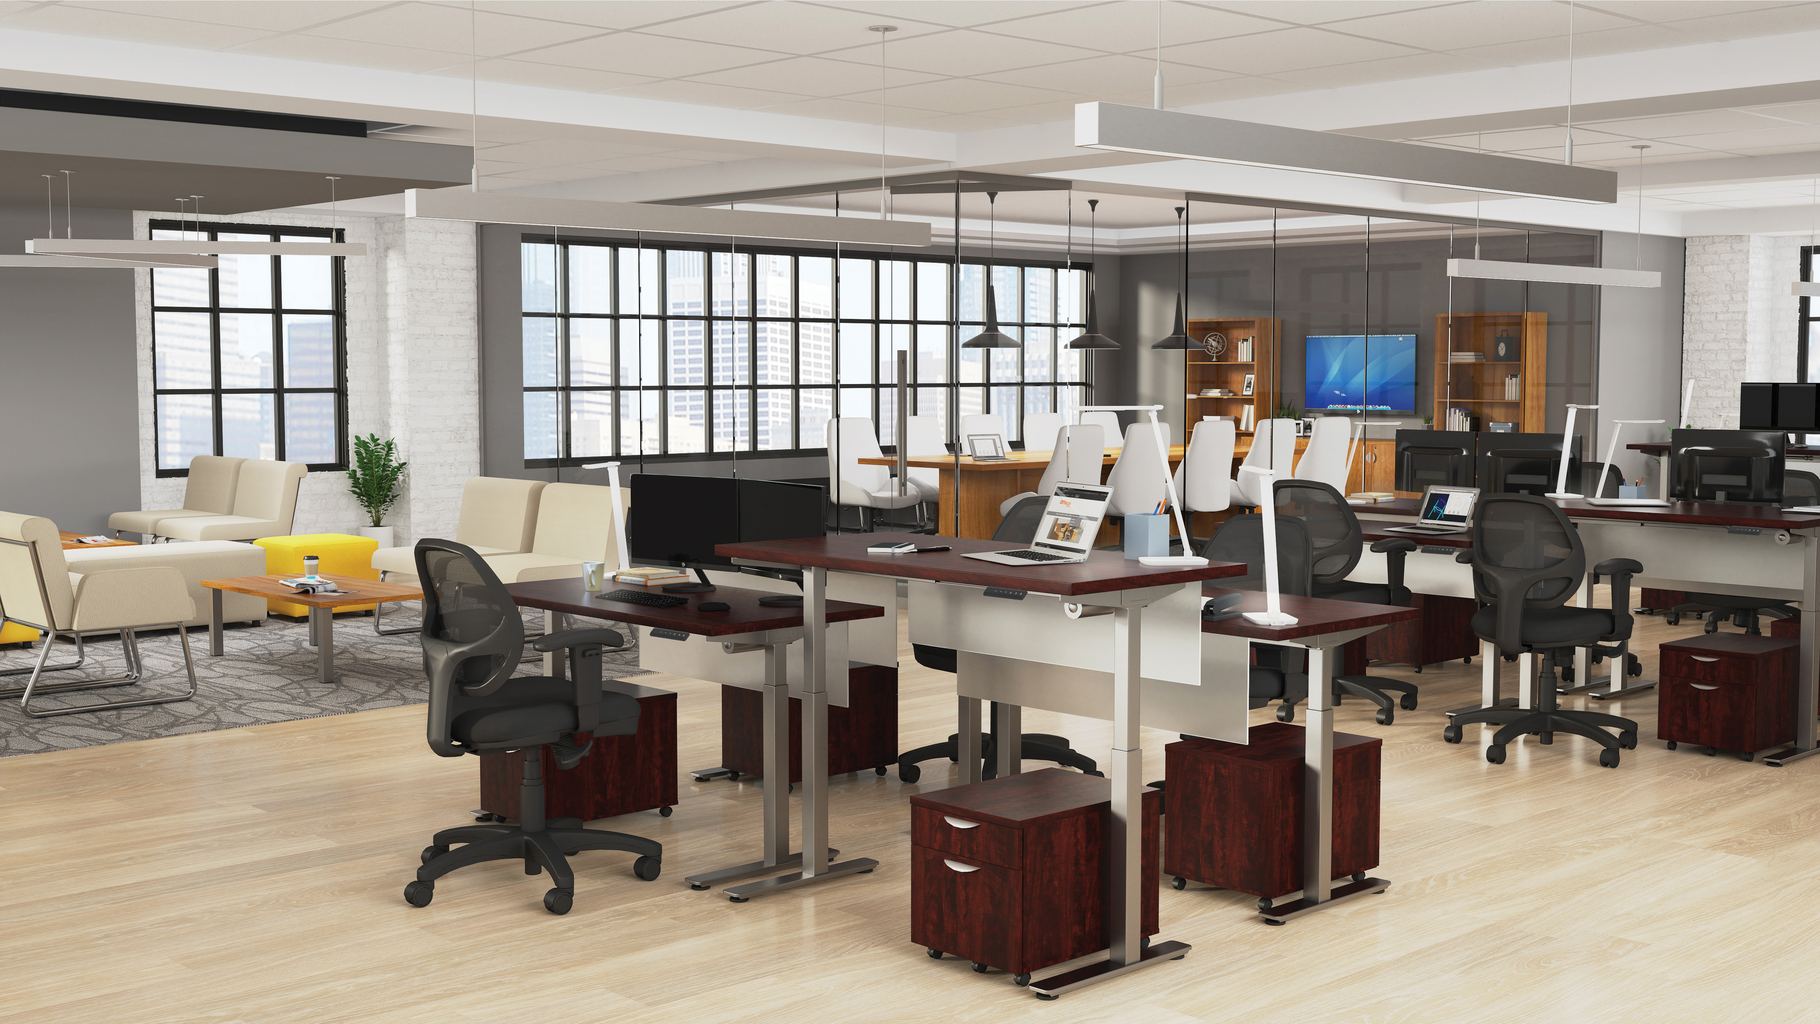 Studio photography of Offices to Go's laminate height adjustable workstations. Two groups of four stations are set together, each with an LED desk lamp and computer. A set of 2 drawers is wheeled in each space, with storage for supplies. A clear glass conference room can be seen in the background, by the open office's windows, with an additional casual seating area to the left.